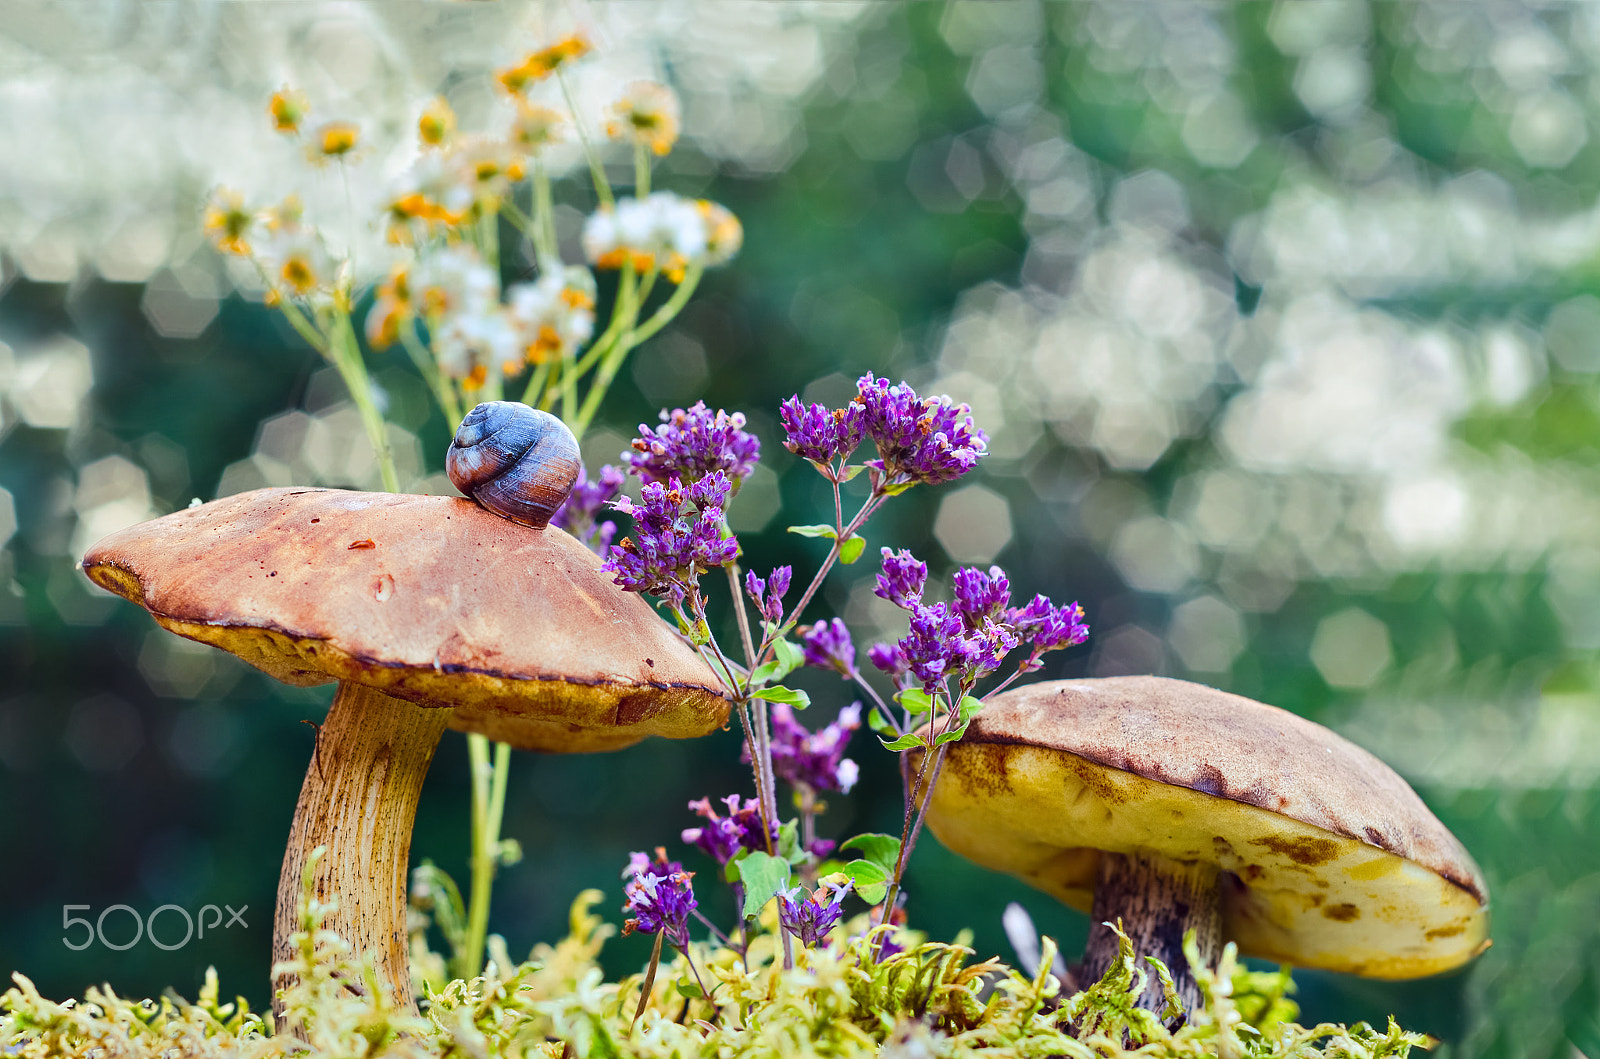 Nikon D7000 sample photo. Natural background with mushrooms and snail photography